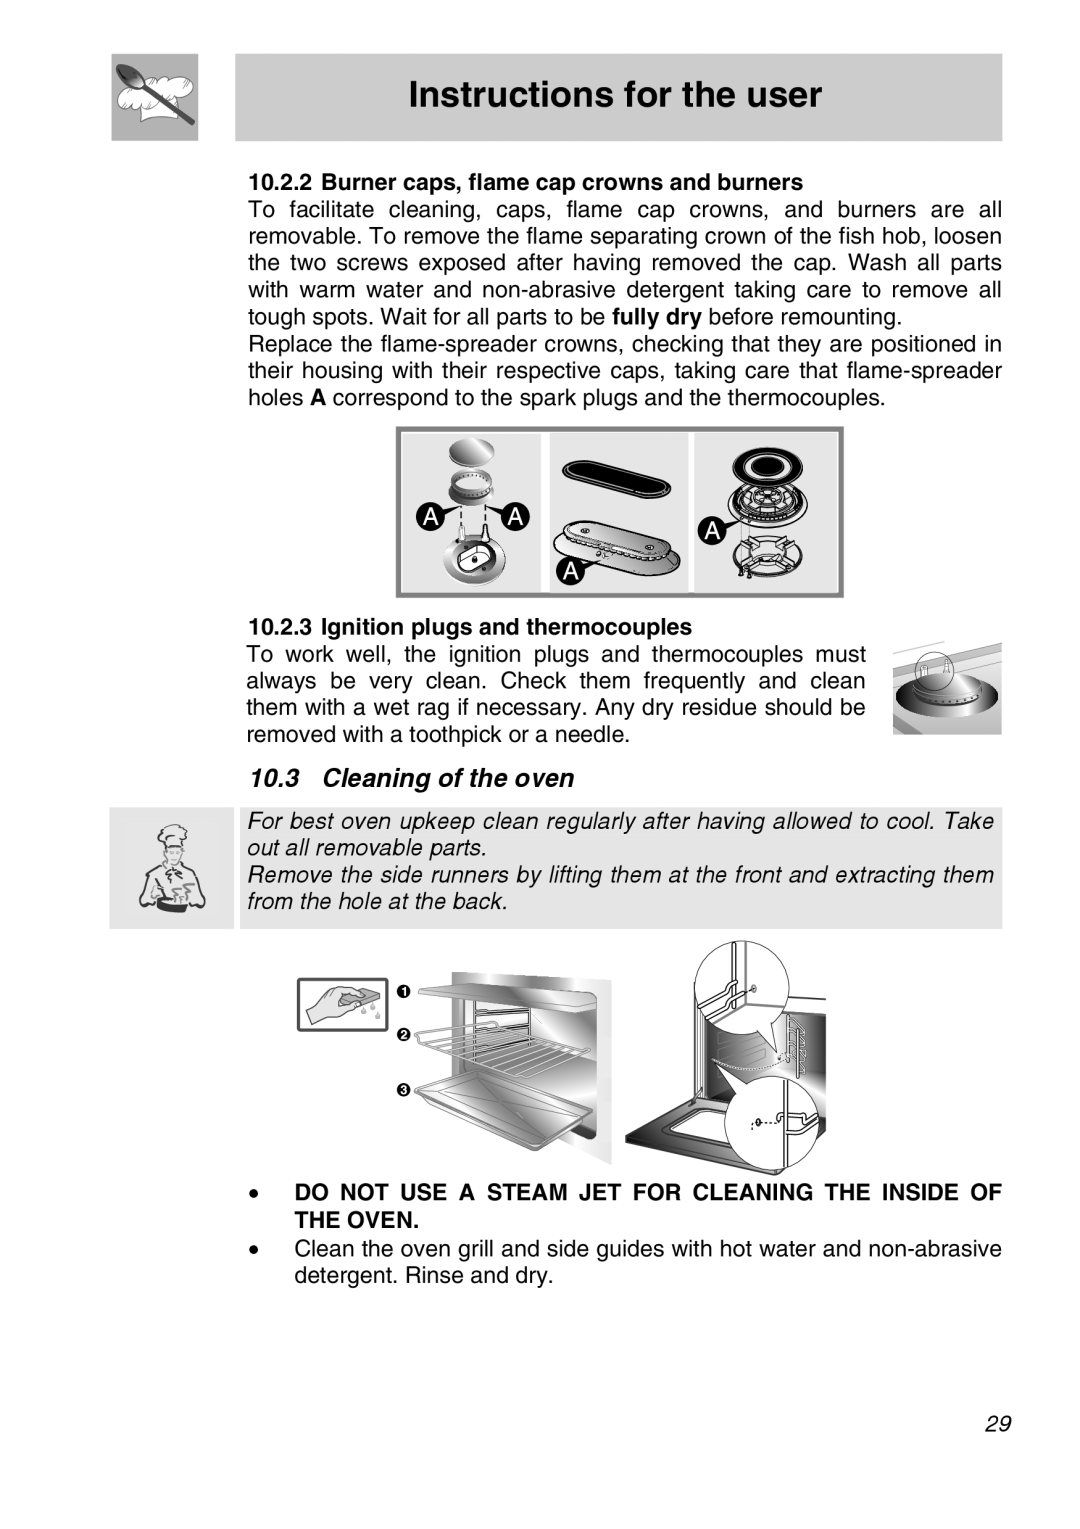 Smeg A21X-6 manual Cleaning of the oven, Burner caps, flame cap crowns and burners, Ignition plugs and thermocouples 